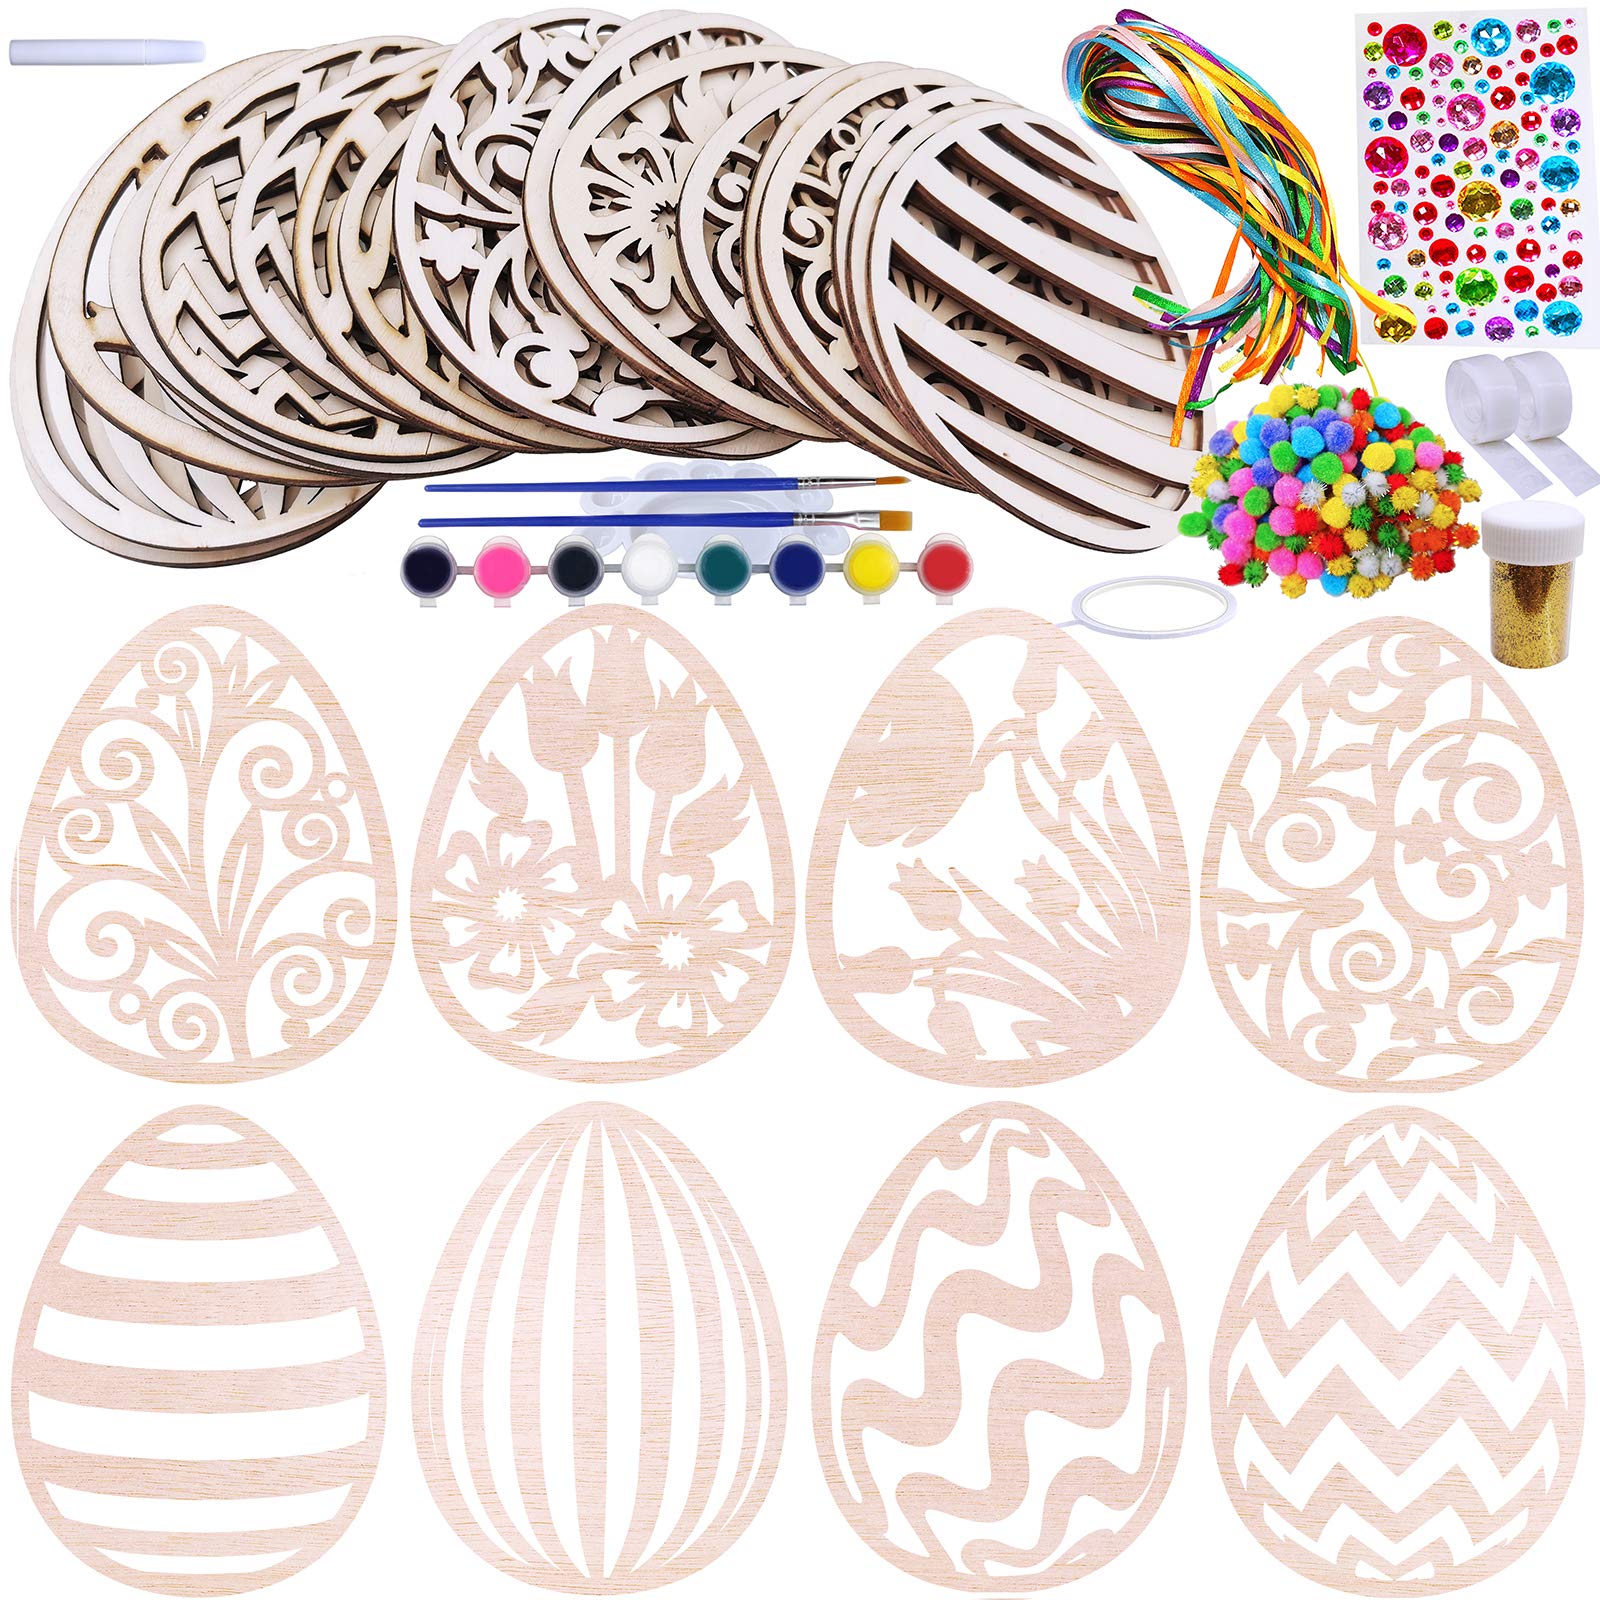 32 Sets Wooden Easter Ornaments Decorations DIY Easter Craft Kits Assorted Paintable Unfinished Wood Laser Cut Easter Egg Ornaments Pom-poms for Kids Easter Spring Classroom Home Activity Art Project